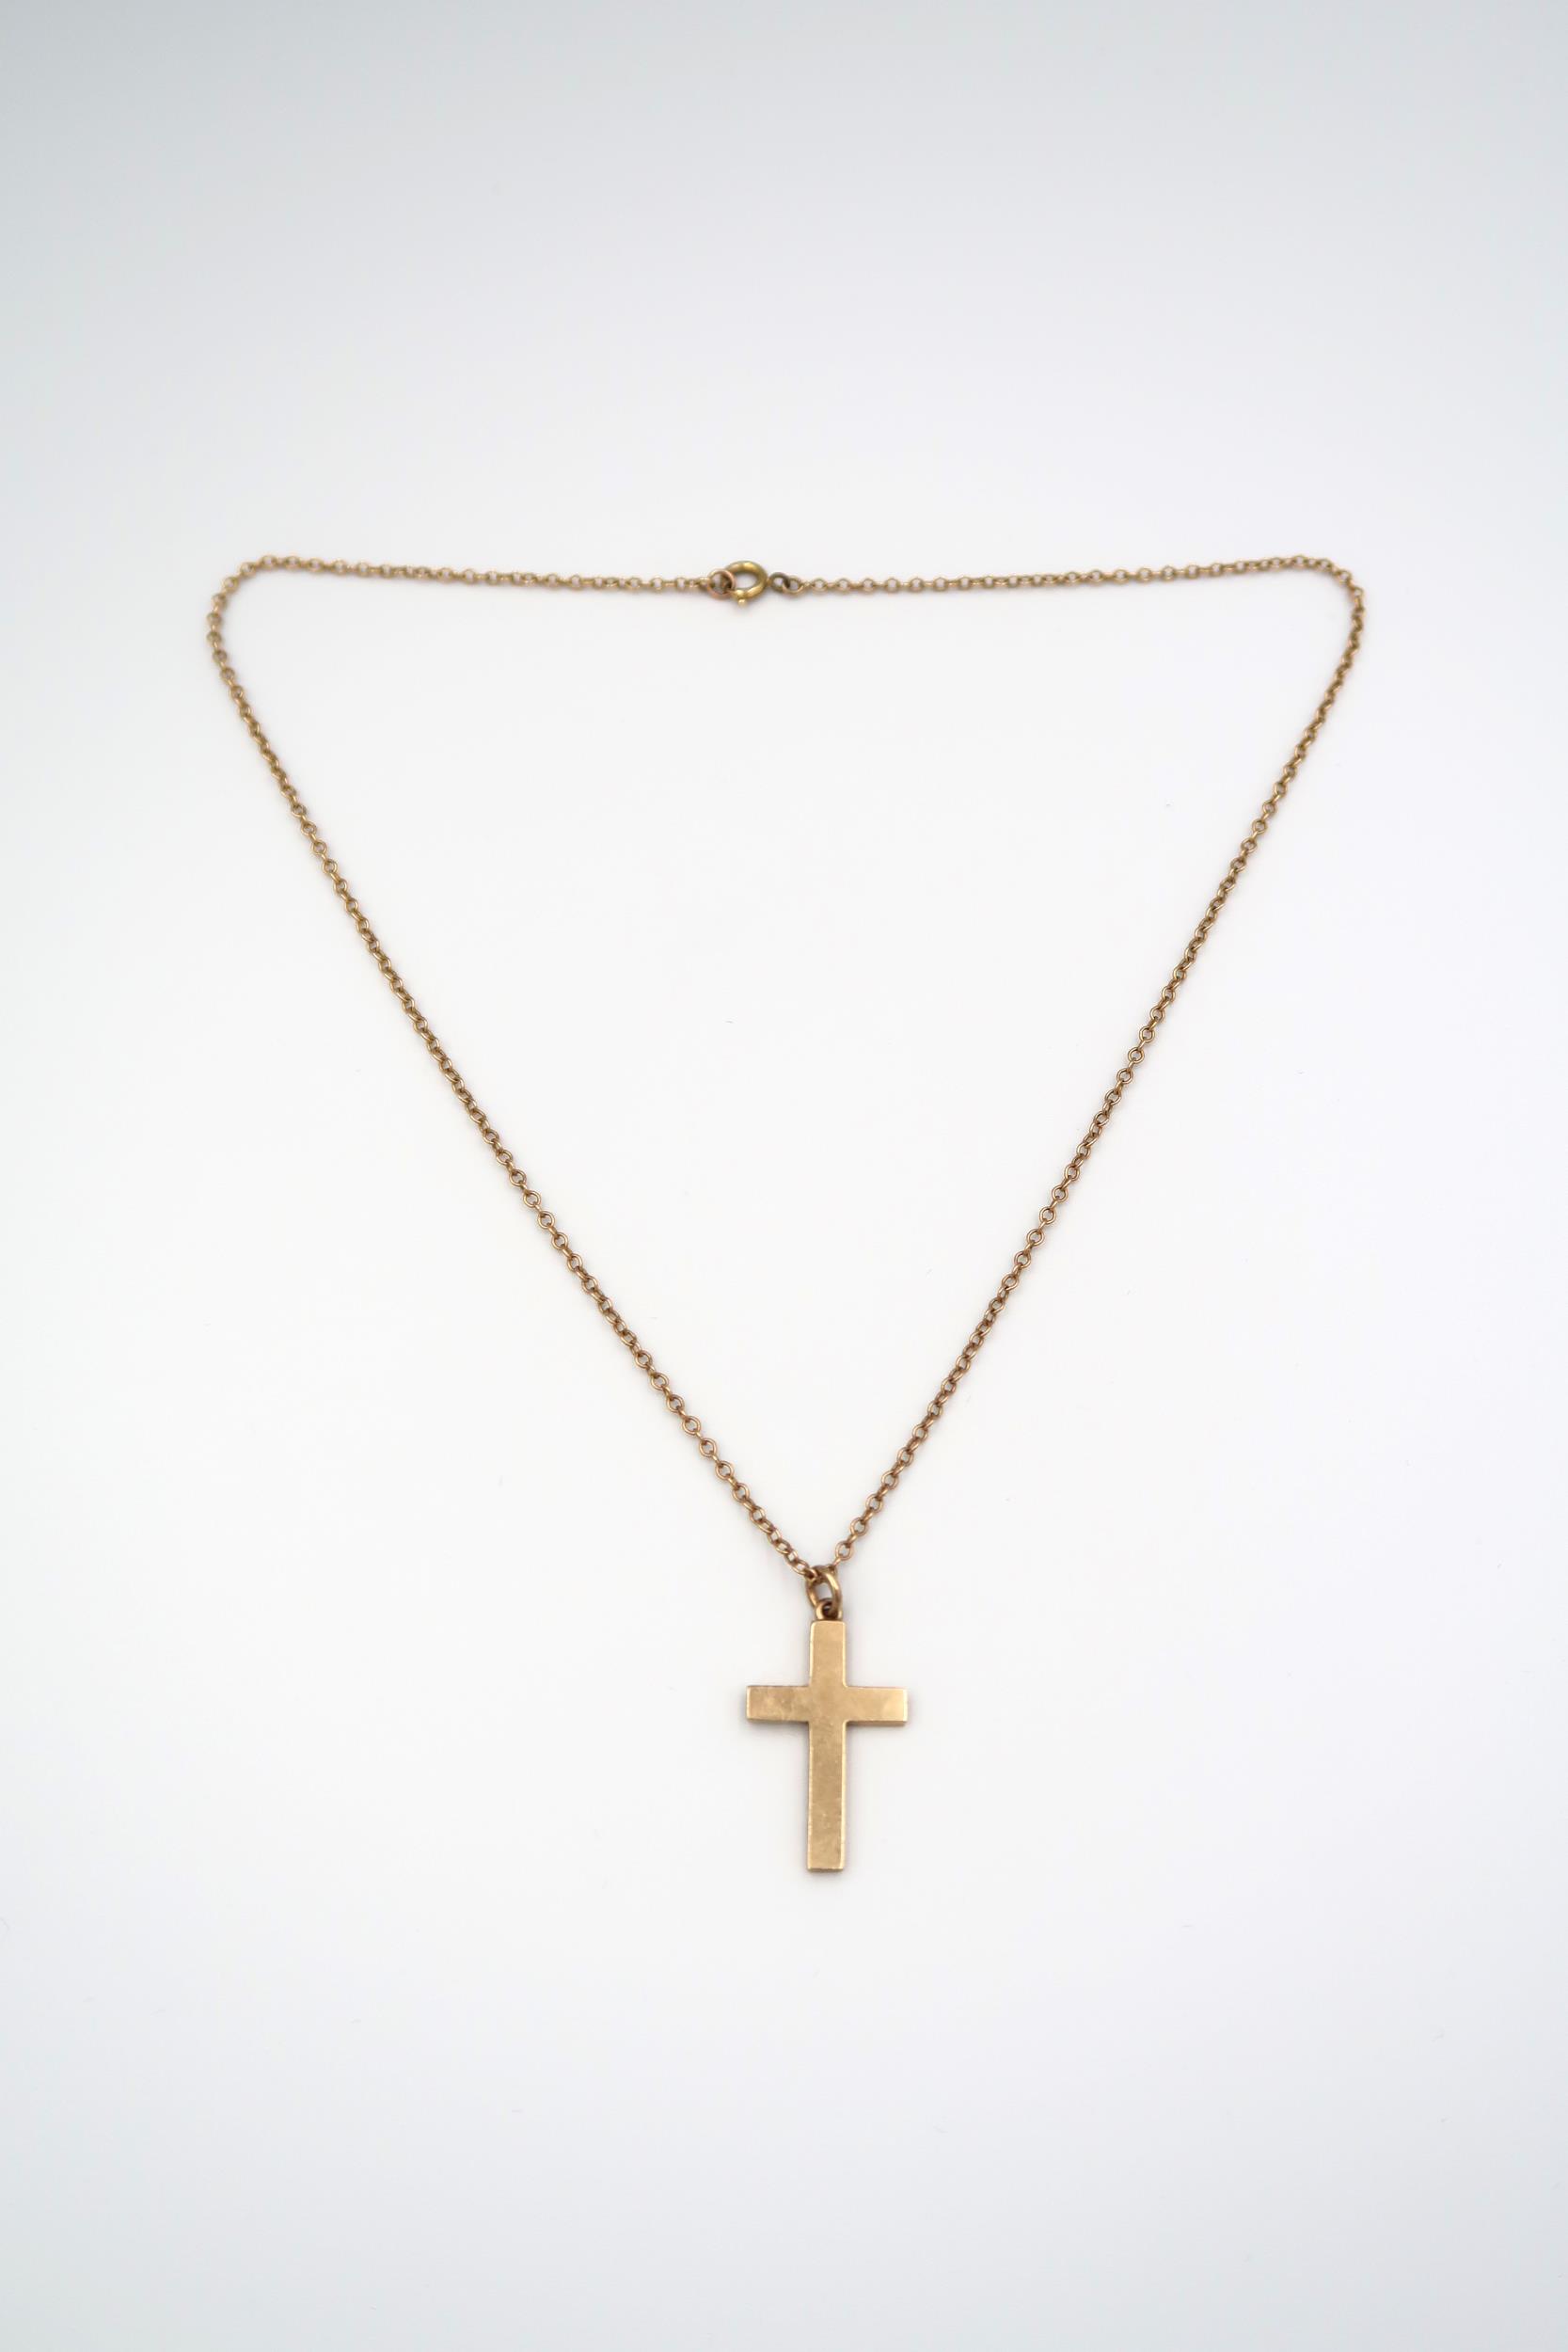 A 9ct gold cross pendant suspended from 430mm belcher link chain stamped 9ct. Weight 4.80 grams. - Image 2 of 2